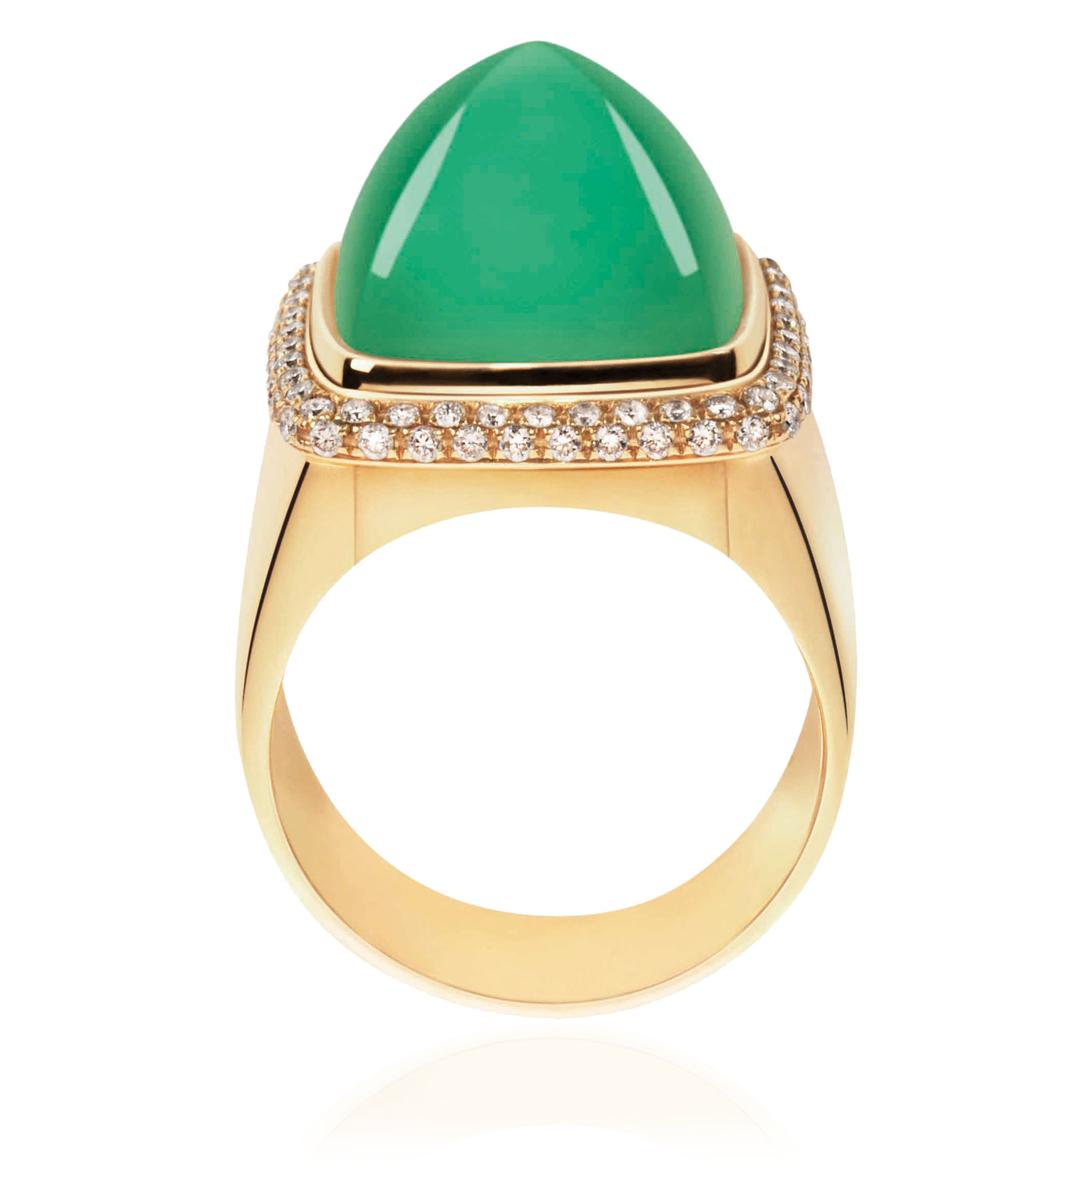 Fred Paris jewellery: switch your gemstone depending on your mood with ...